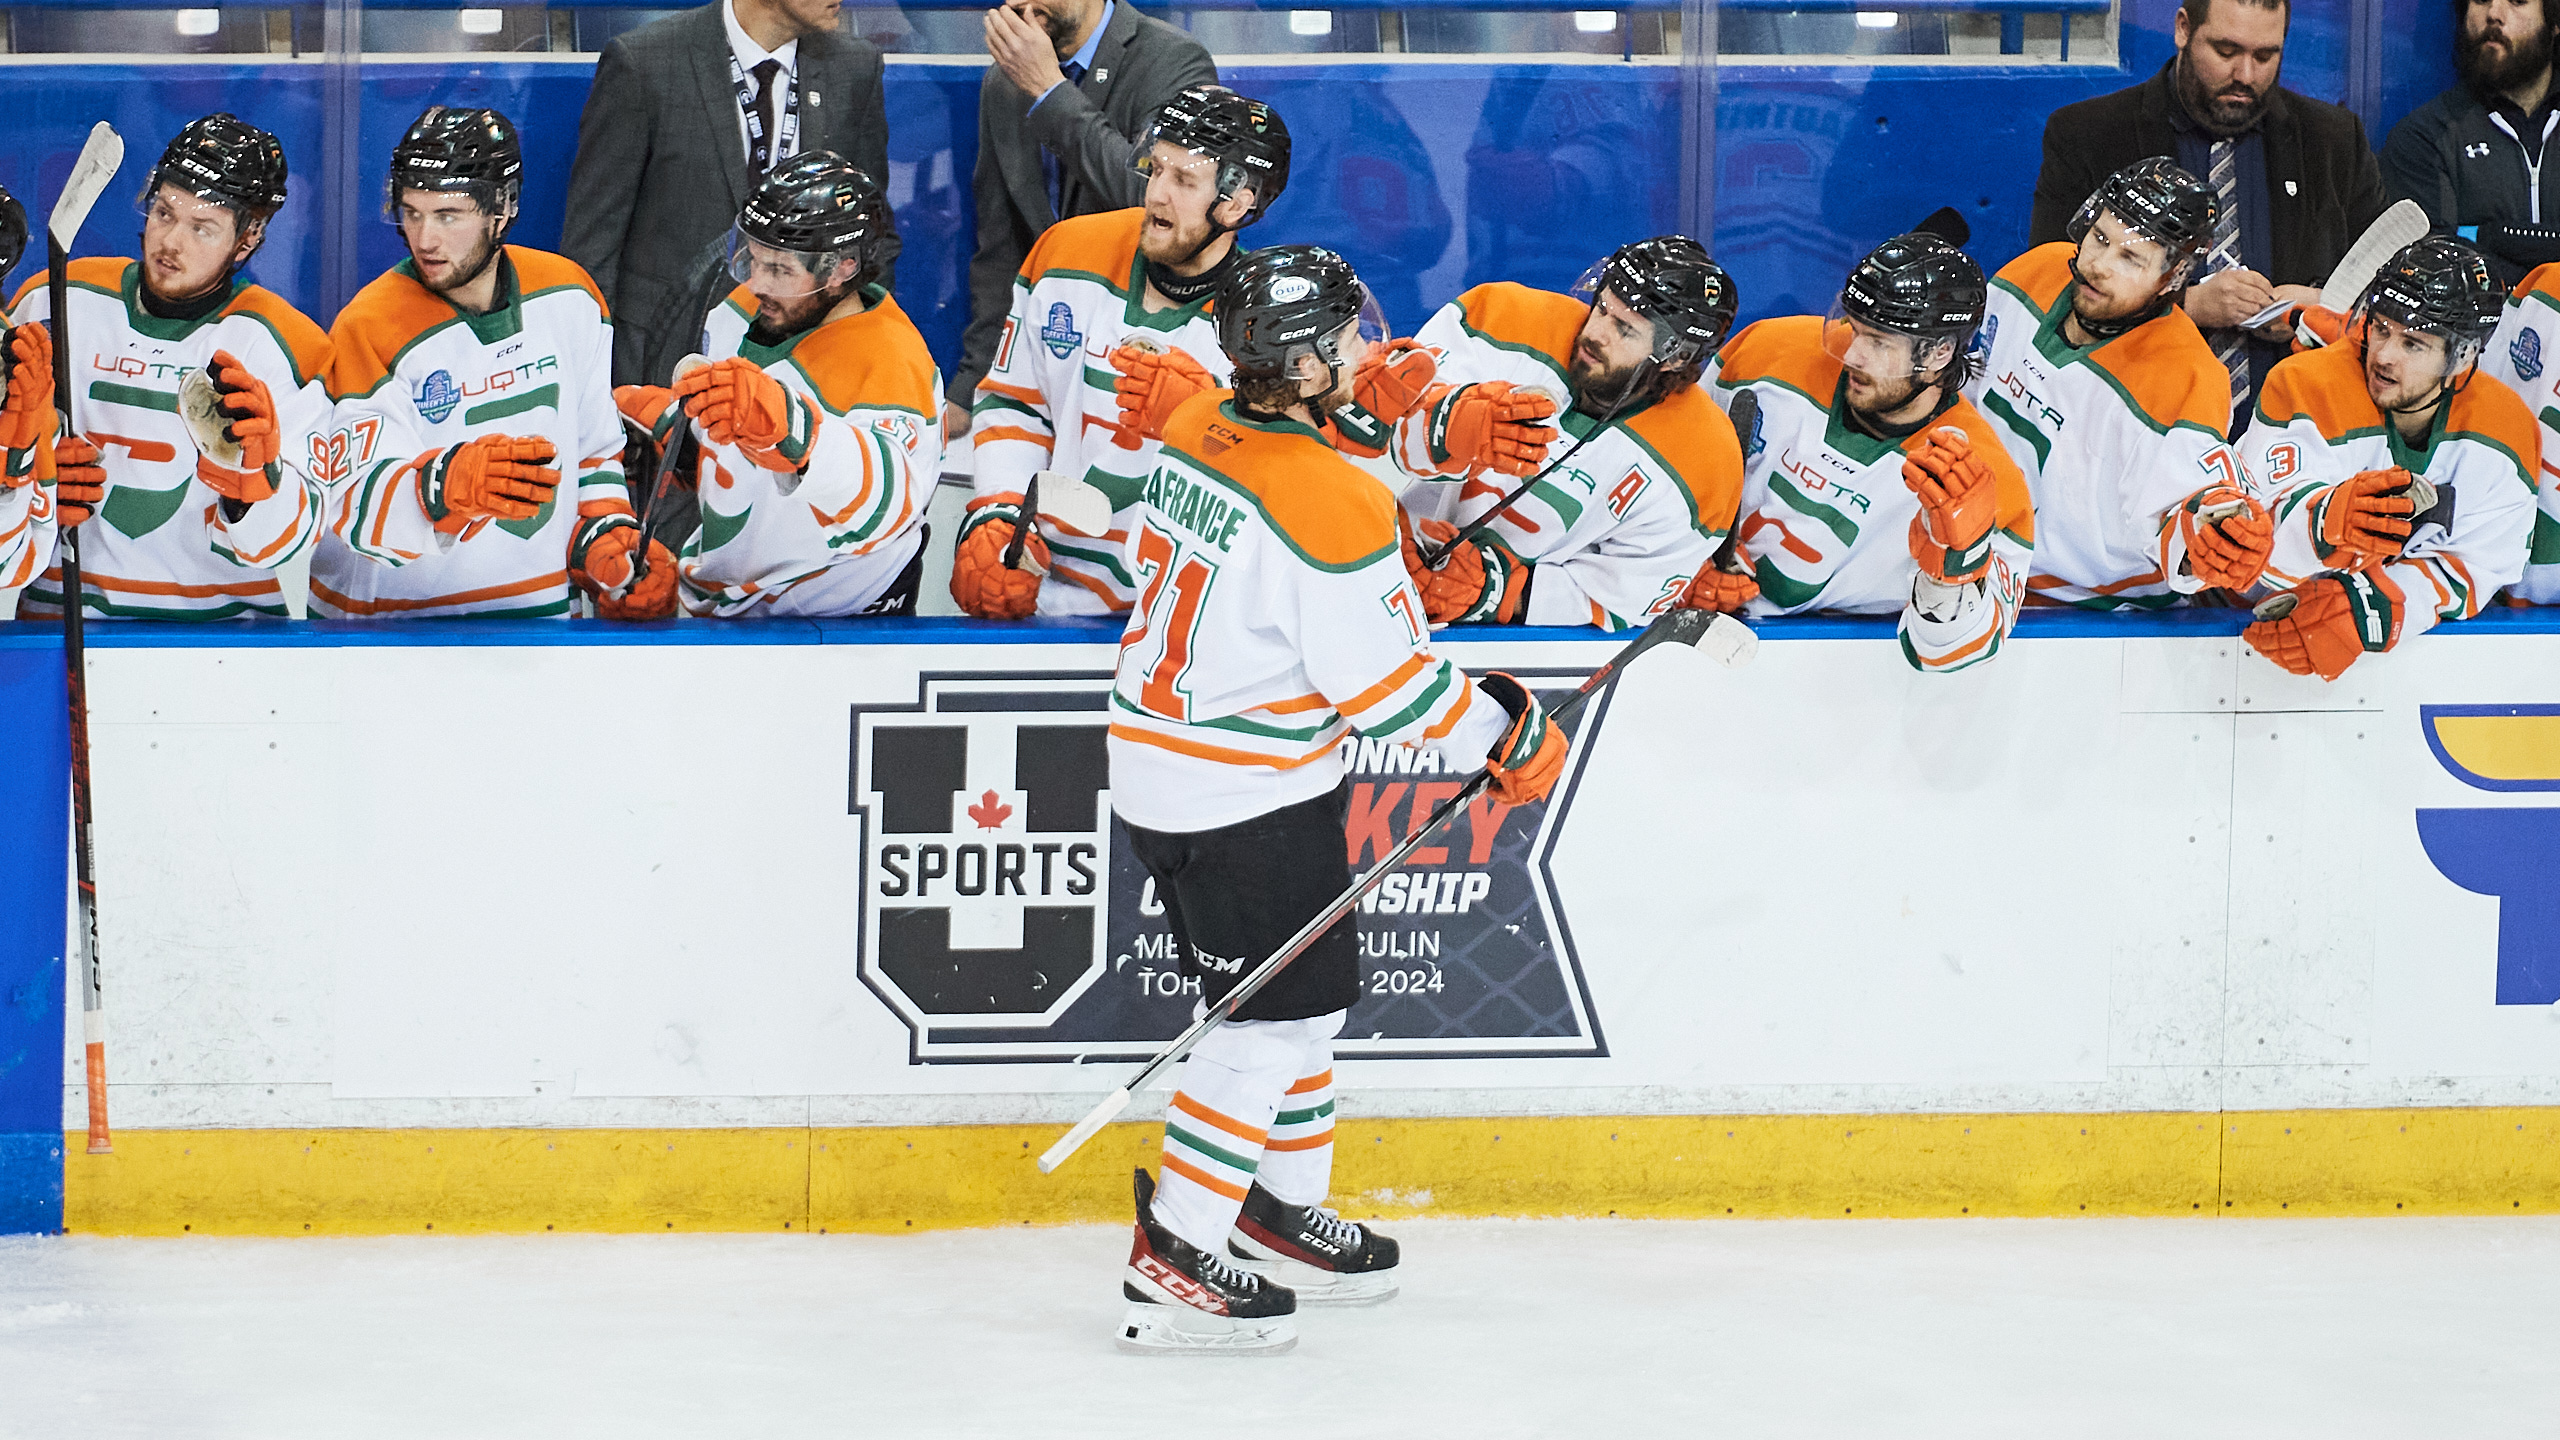 A UQTR player high fives his bench